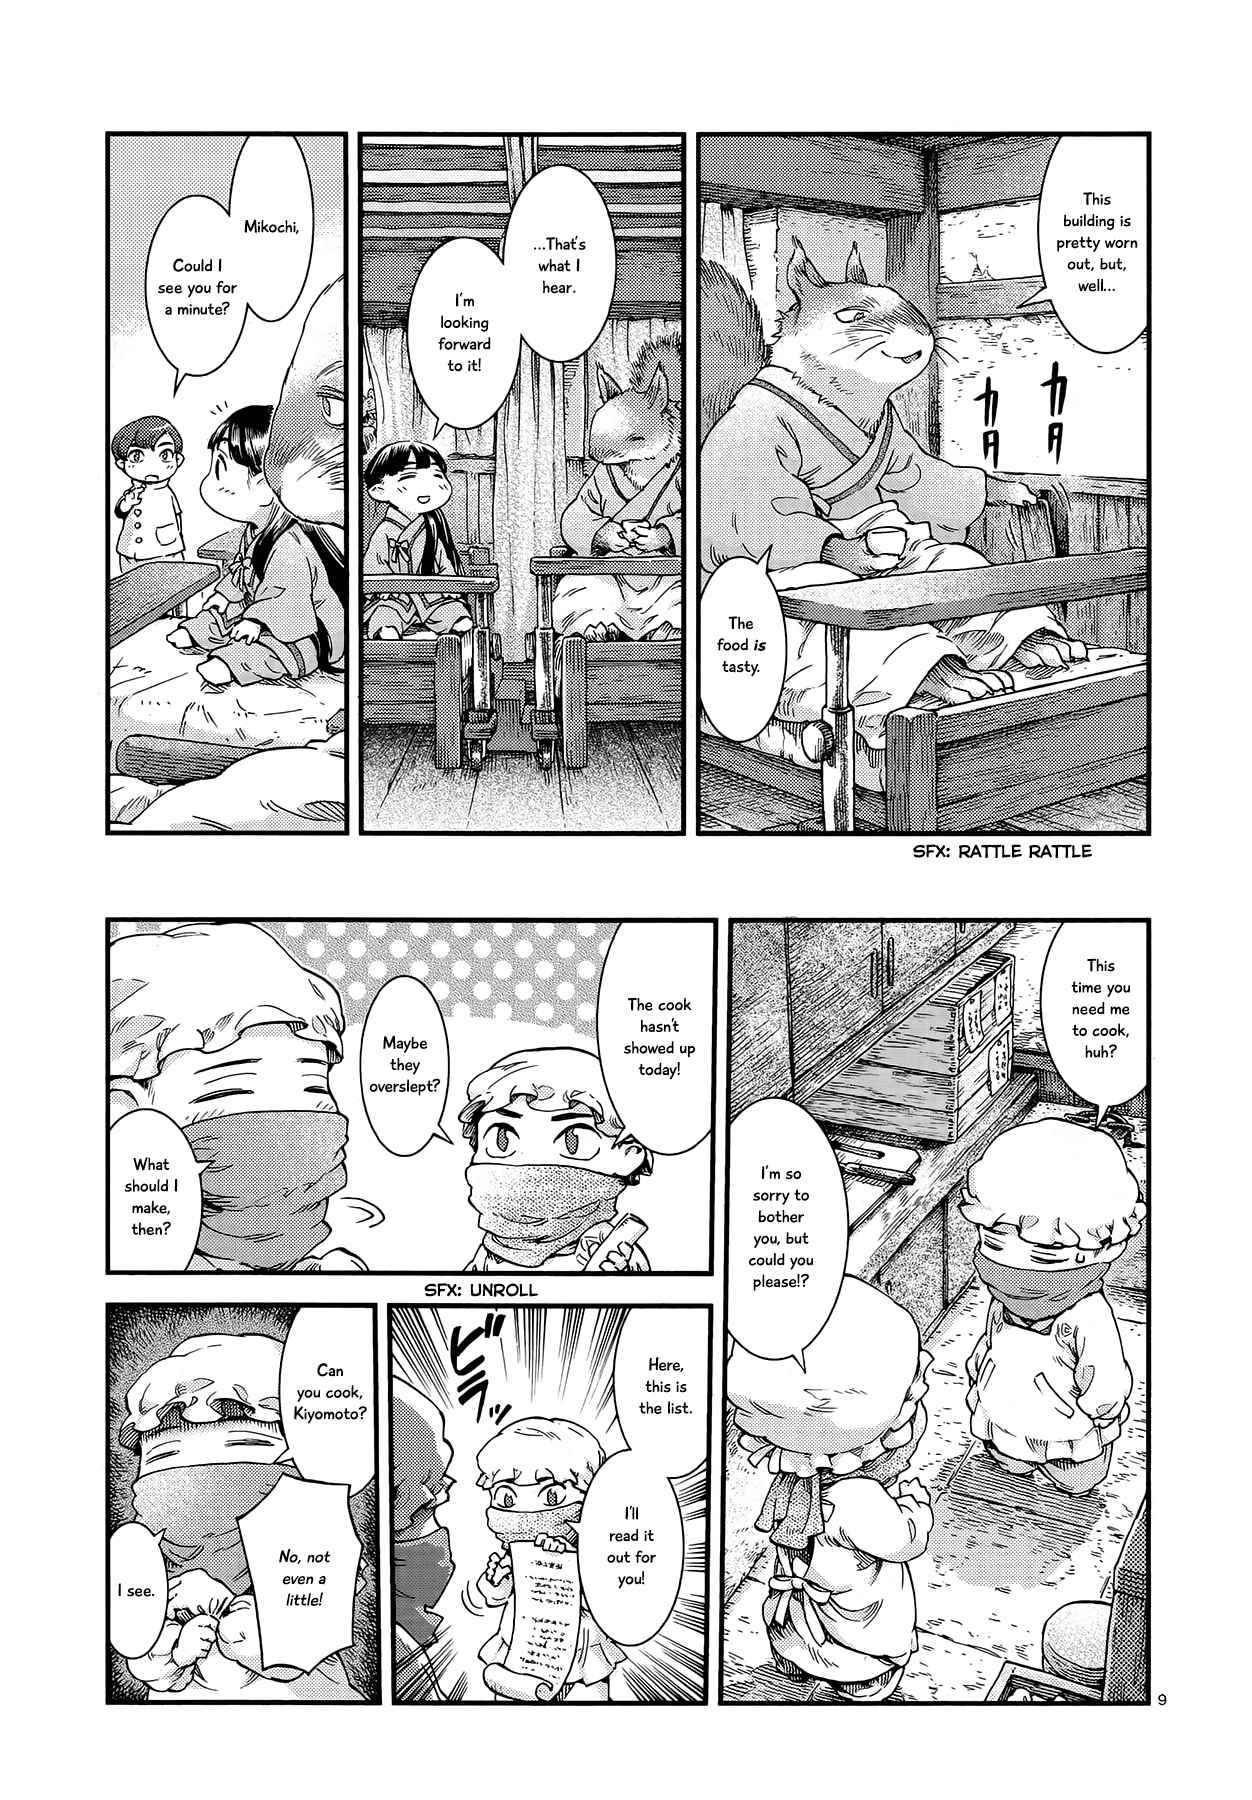 Hakumei to Mikochi Ch. 48 Clinic on the Edge of Town